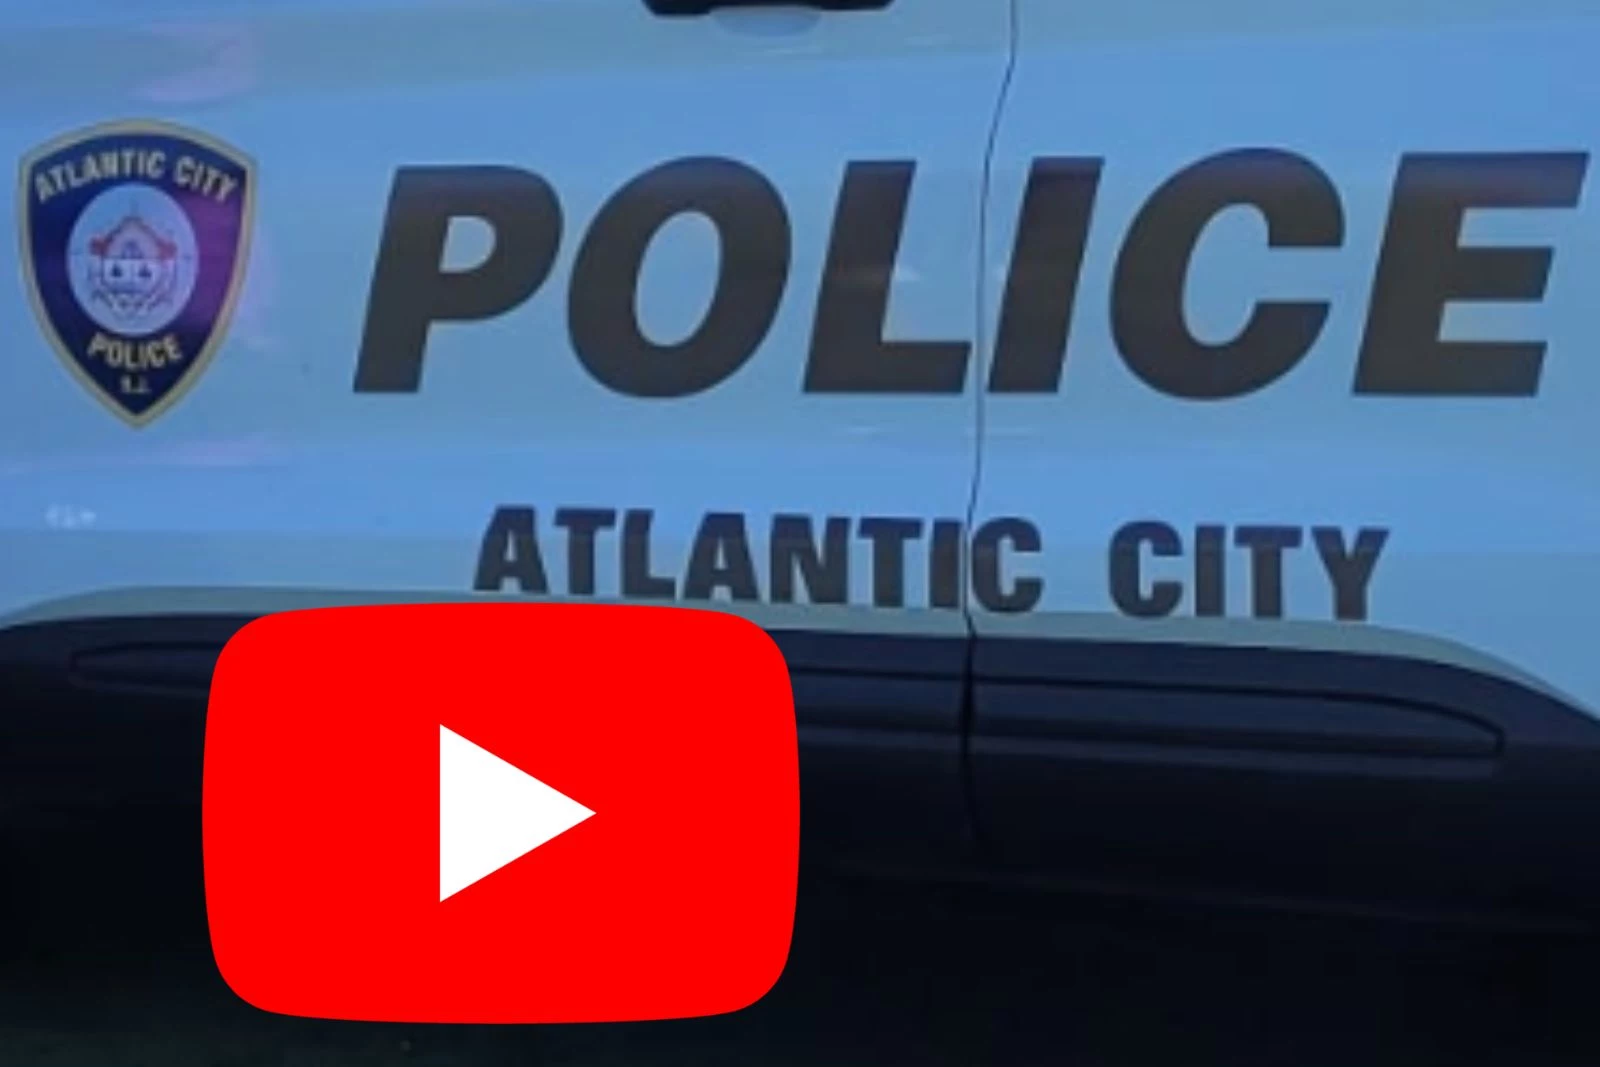 Child luring arrests rack up in Atlantic City with Youtube help